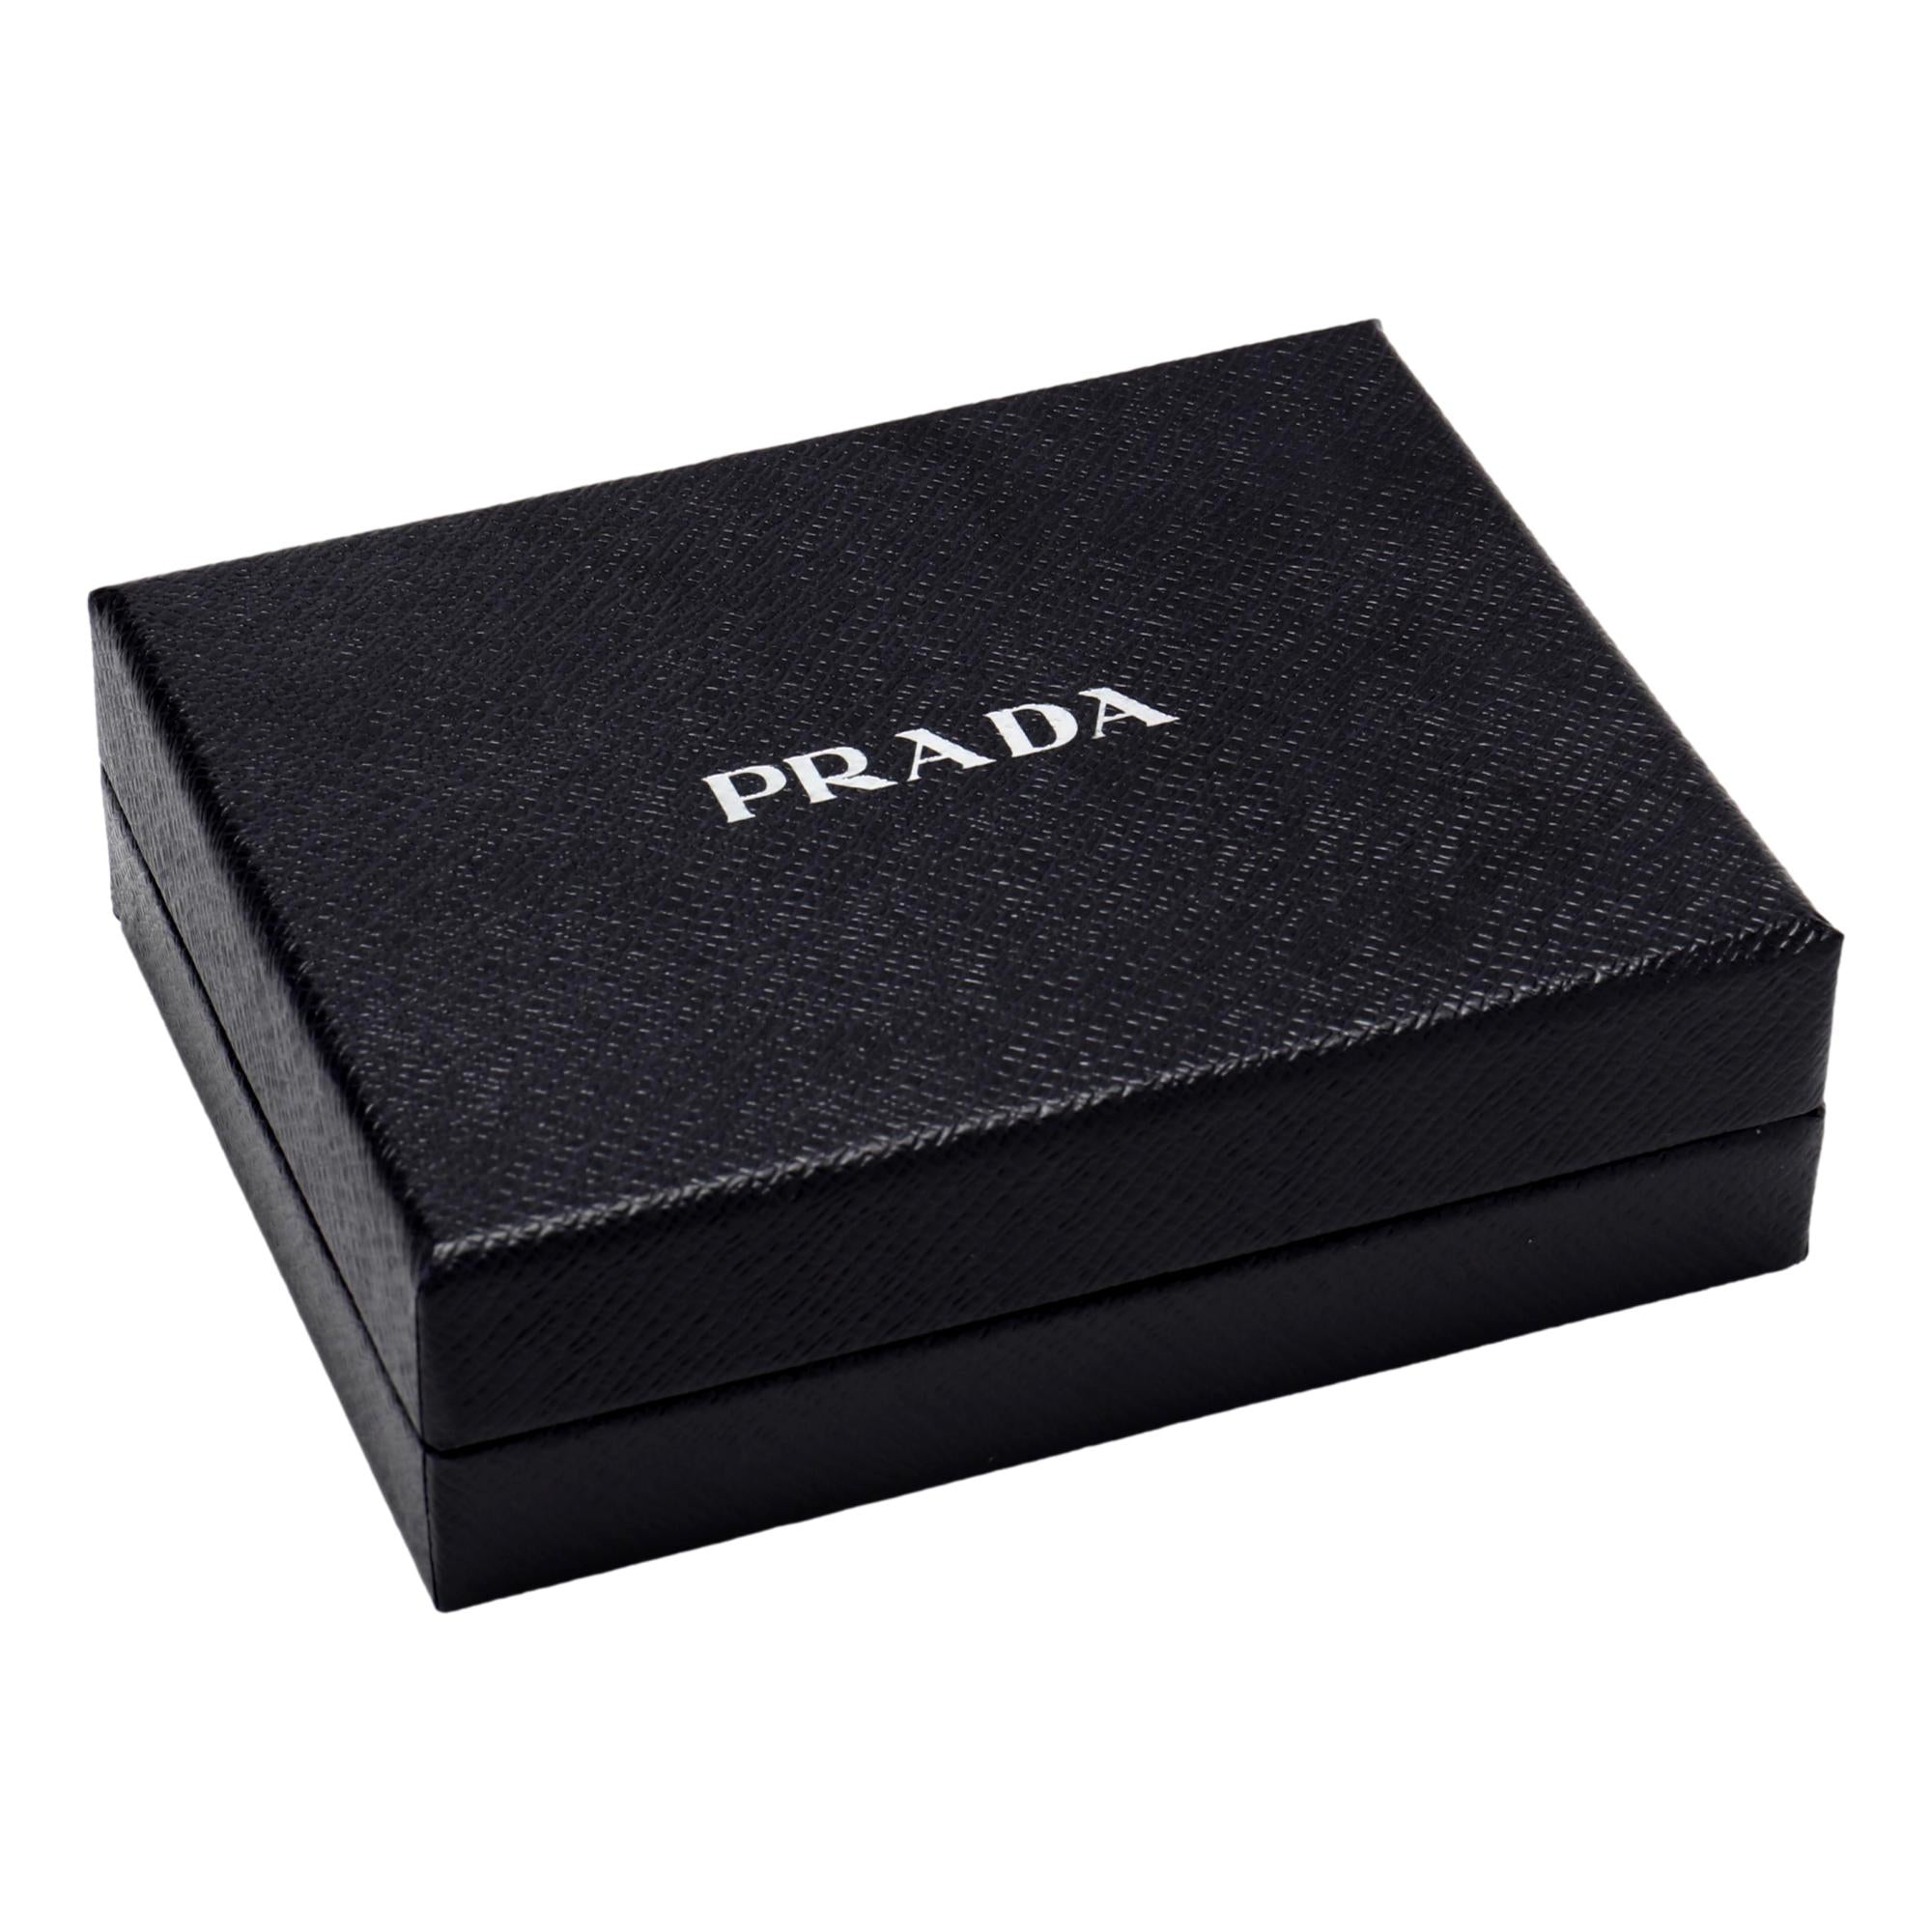 Prada Black Saffiano Leather Key Holder Pouch Wallet at_Queen_Bee_of_Beverly_Hills